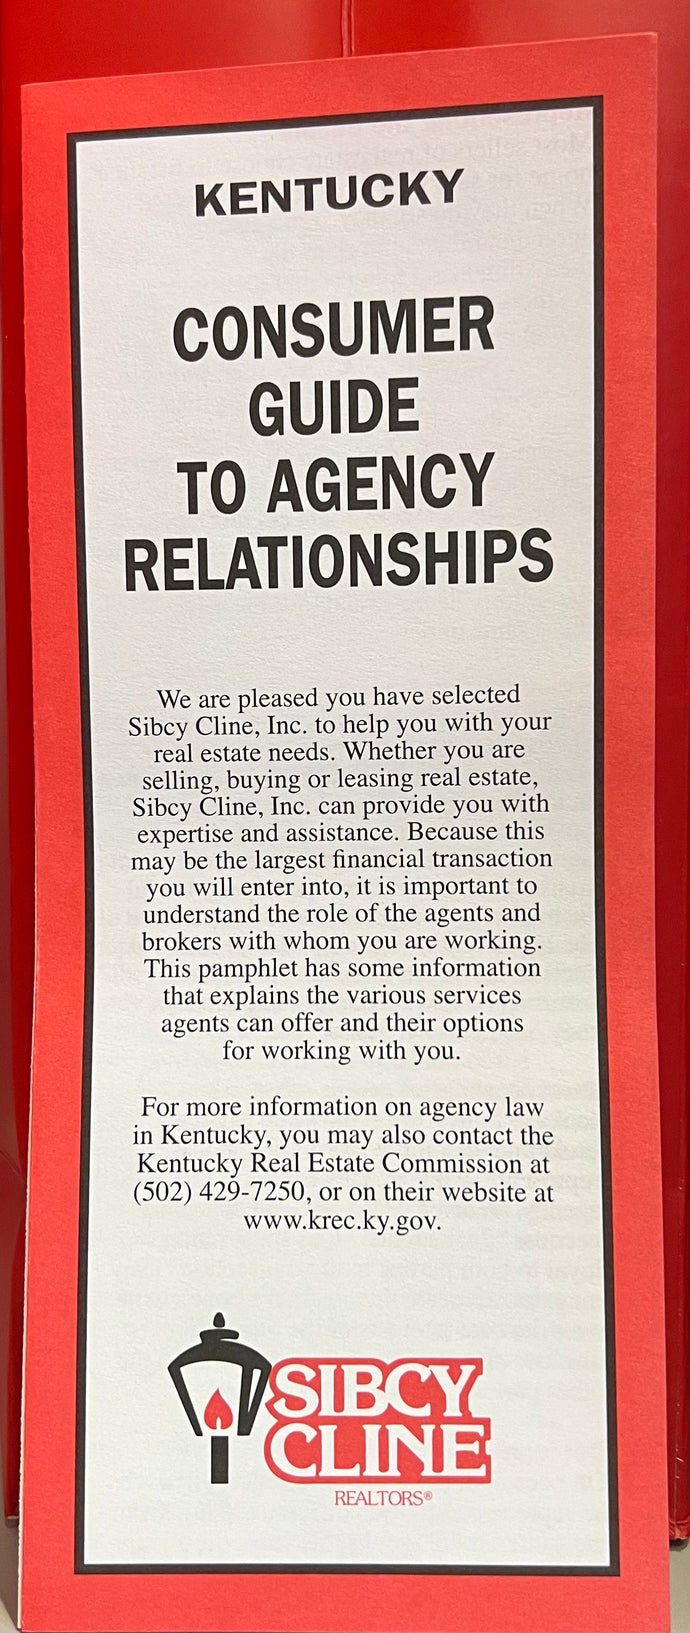 OFFICE ITEM - KY ONLY Guide to Agency Relationships